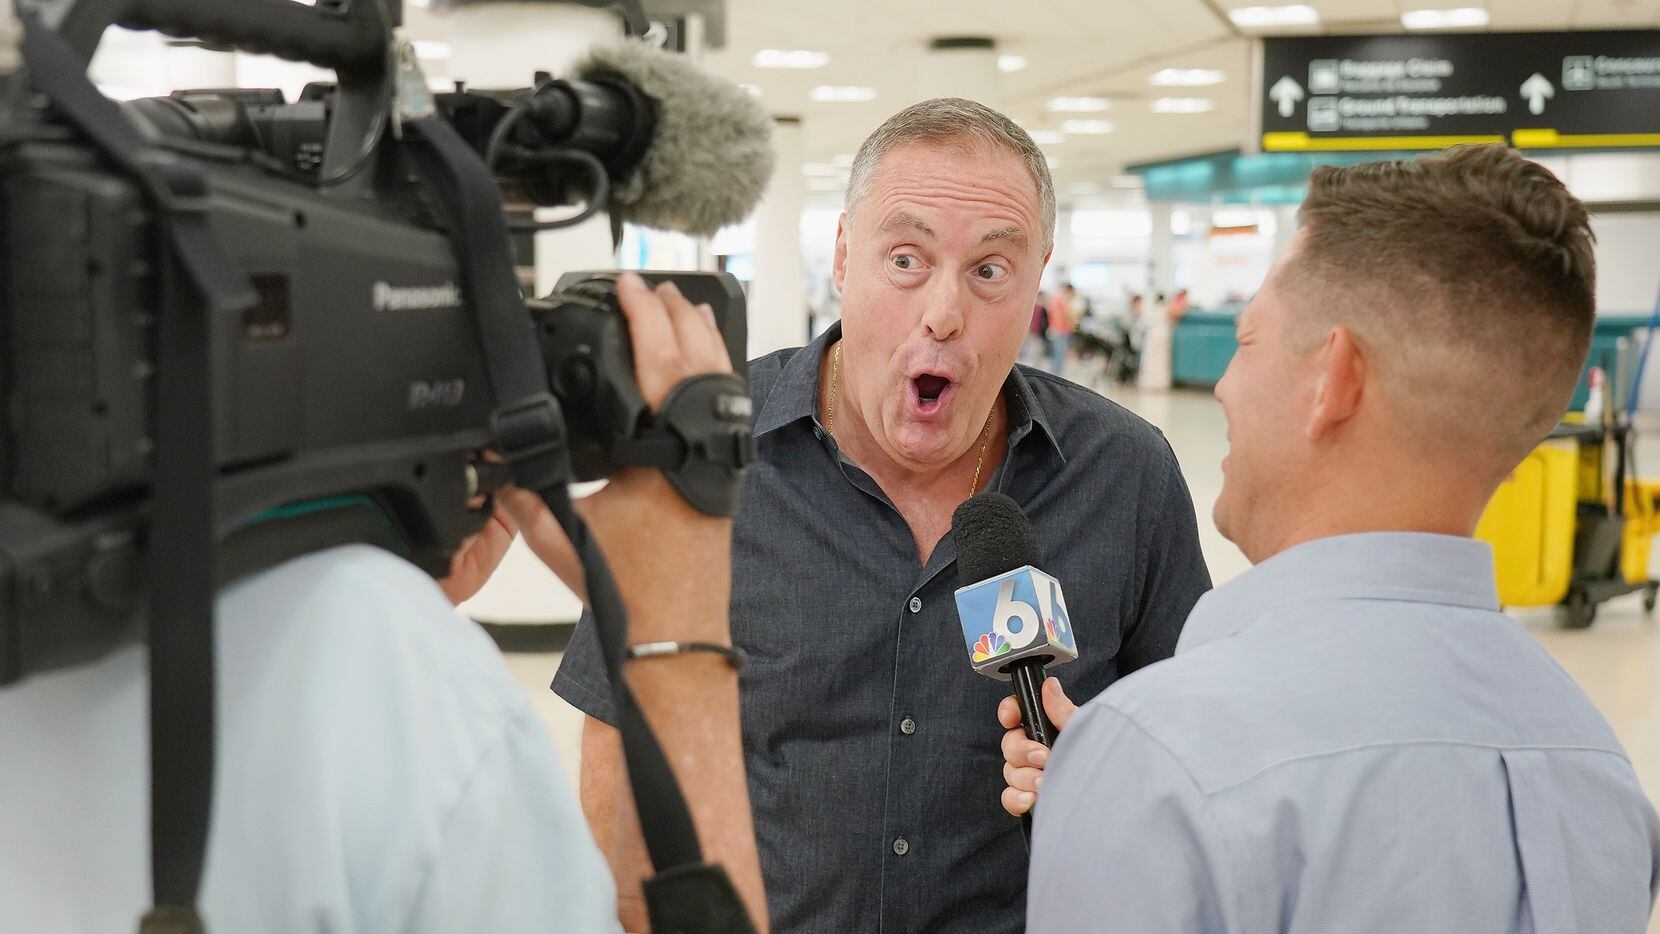 MIAMI, FL - JUNE 05:  Andres Cantor of Telemundo Deportes Commentary Team are seen at Miami International Airport during a World Cup Send-Off on June 5, 2018 in Miami, Florida.